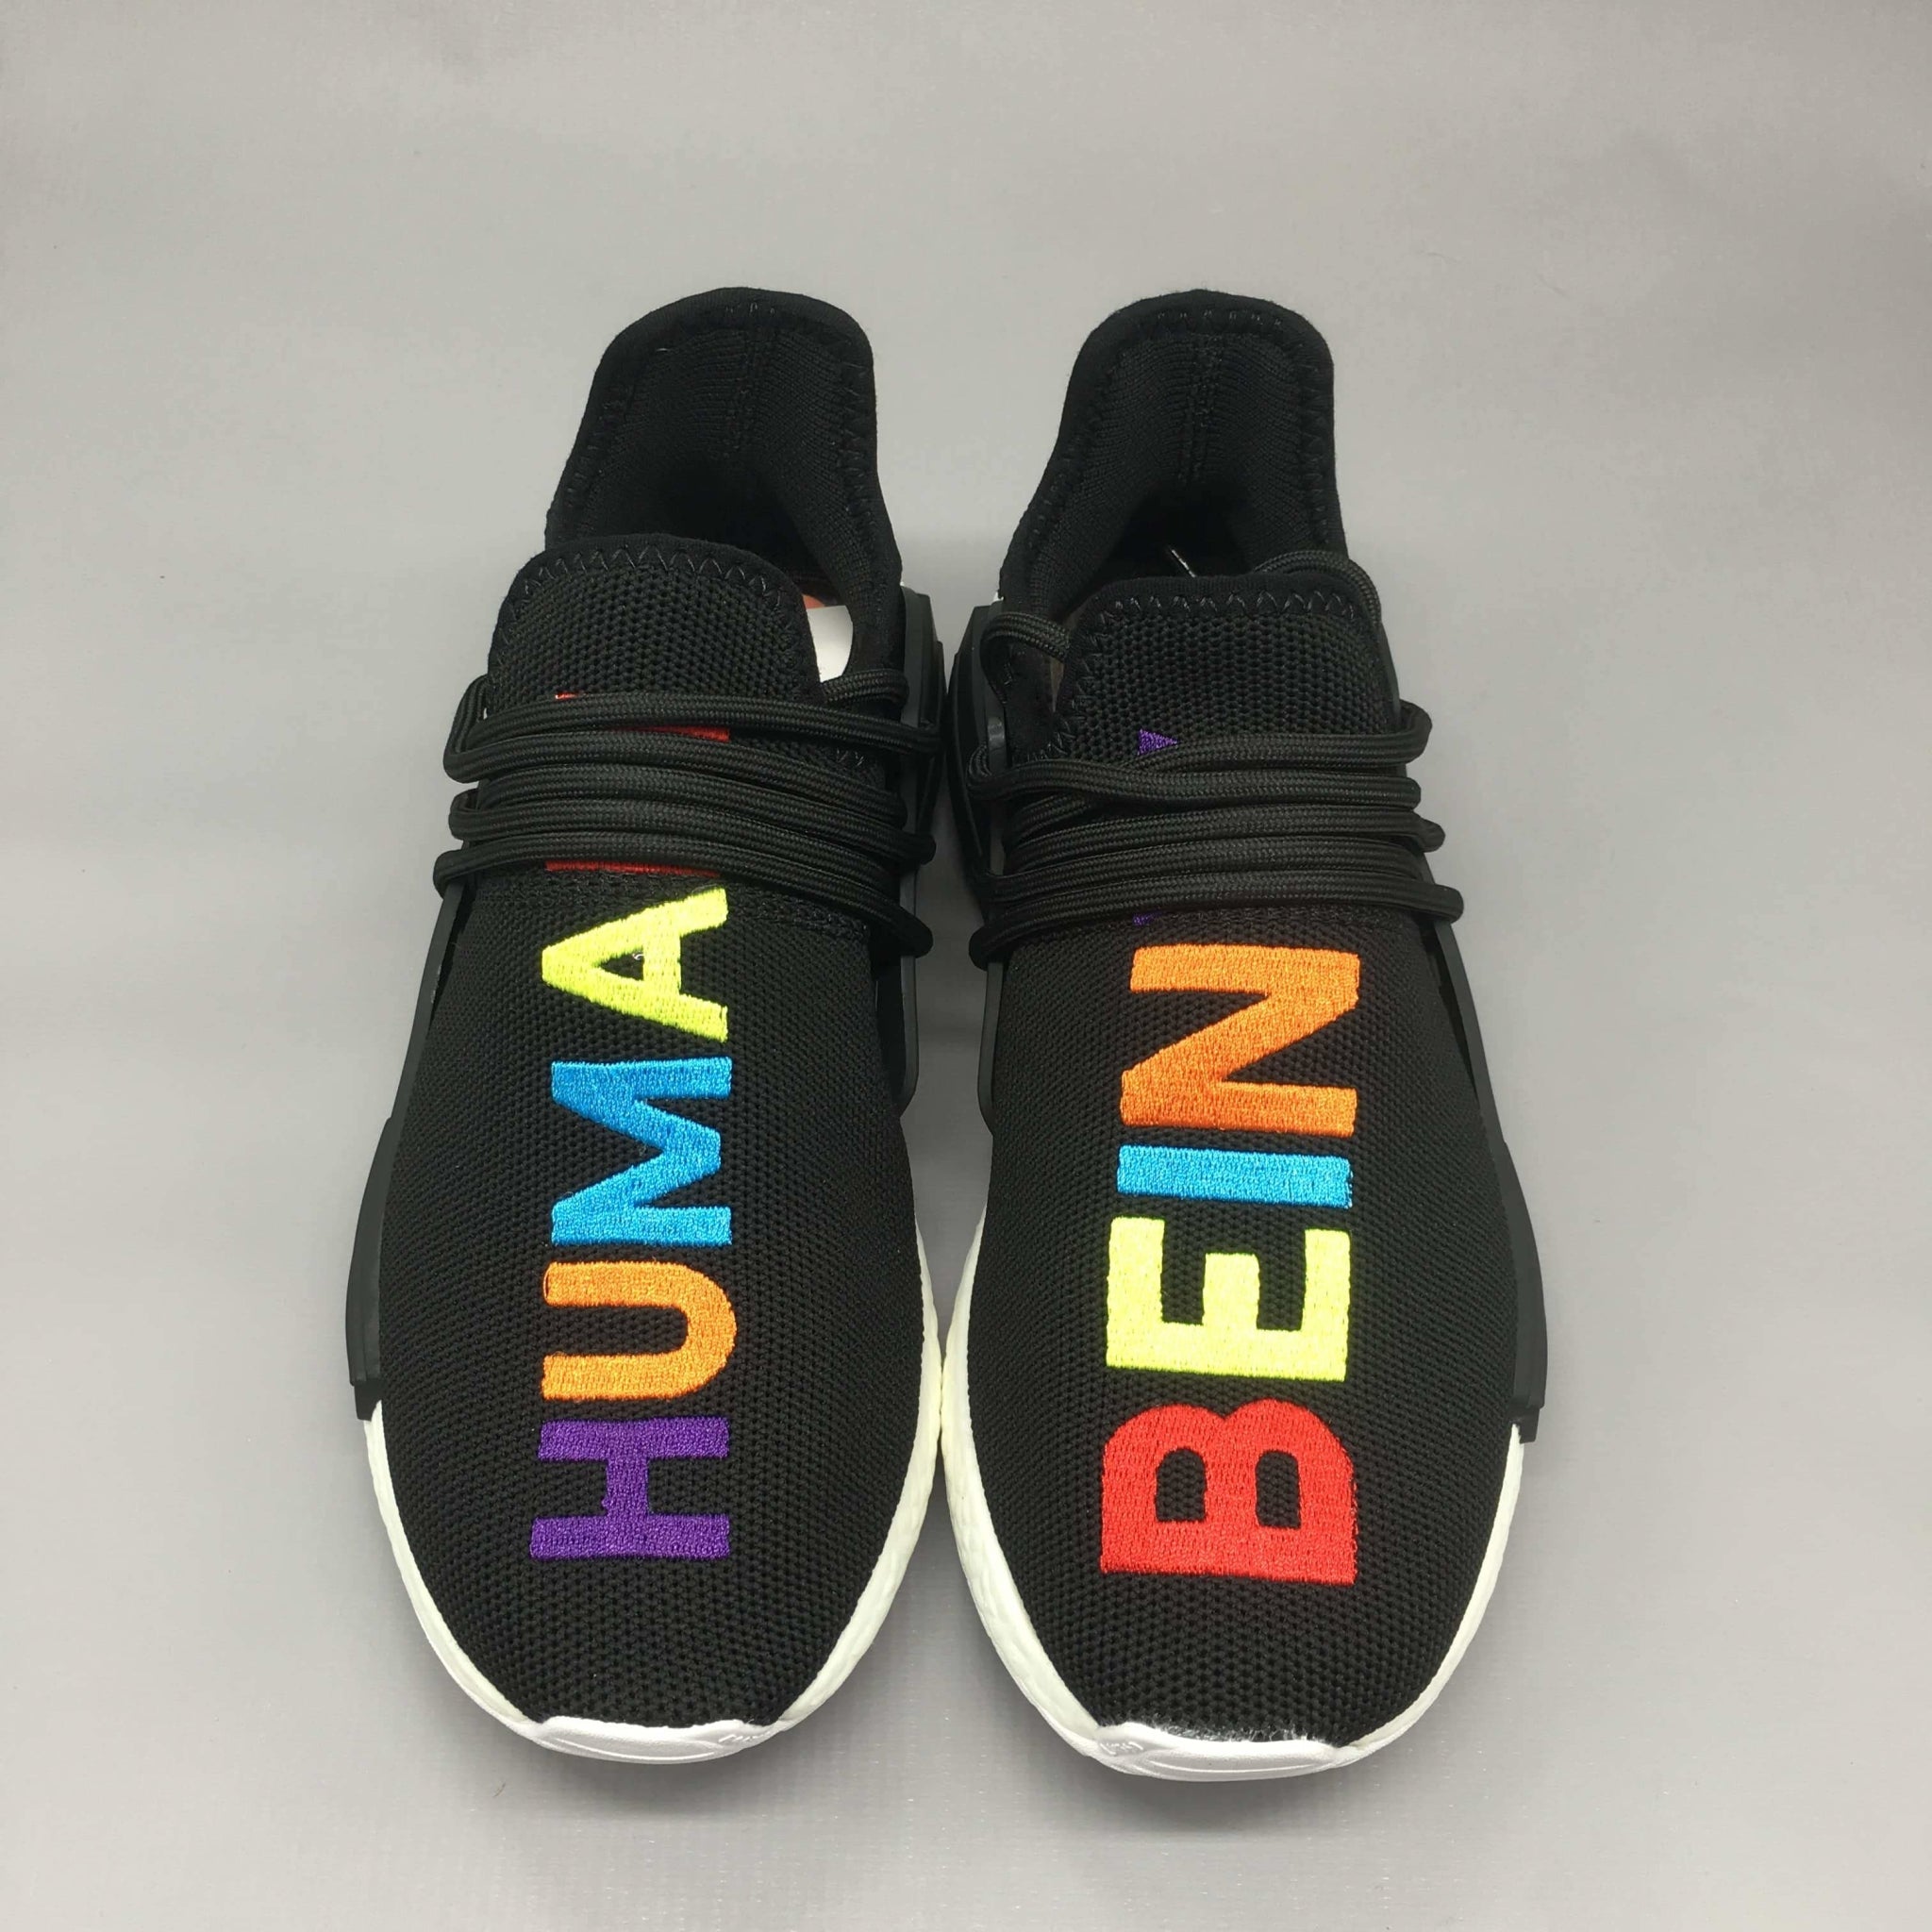 human being shoes